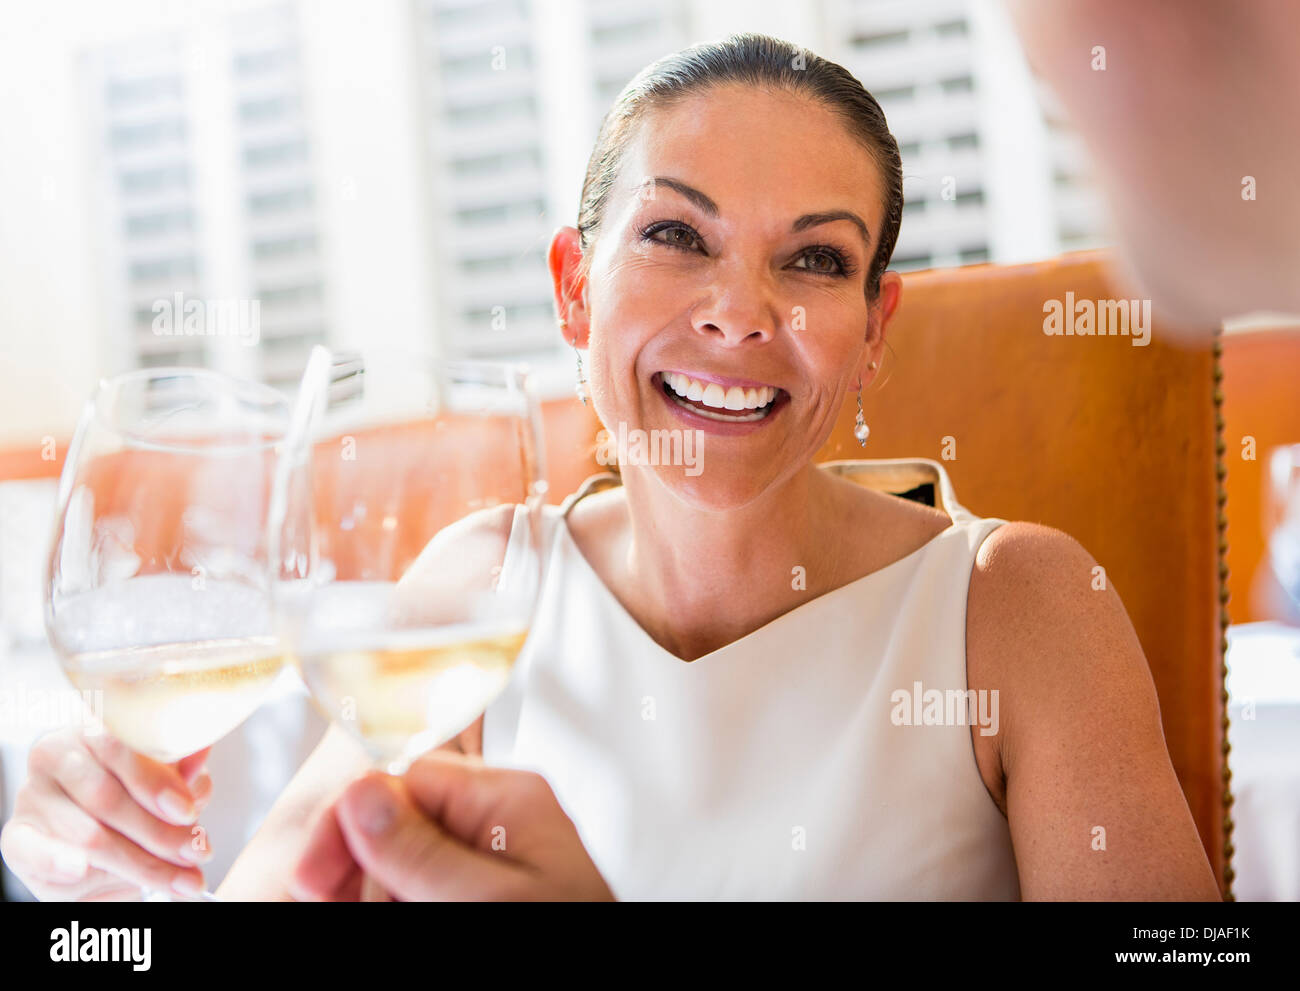 Couple toasting each other at restaurant Stock Photo